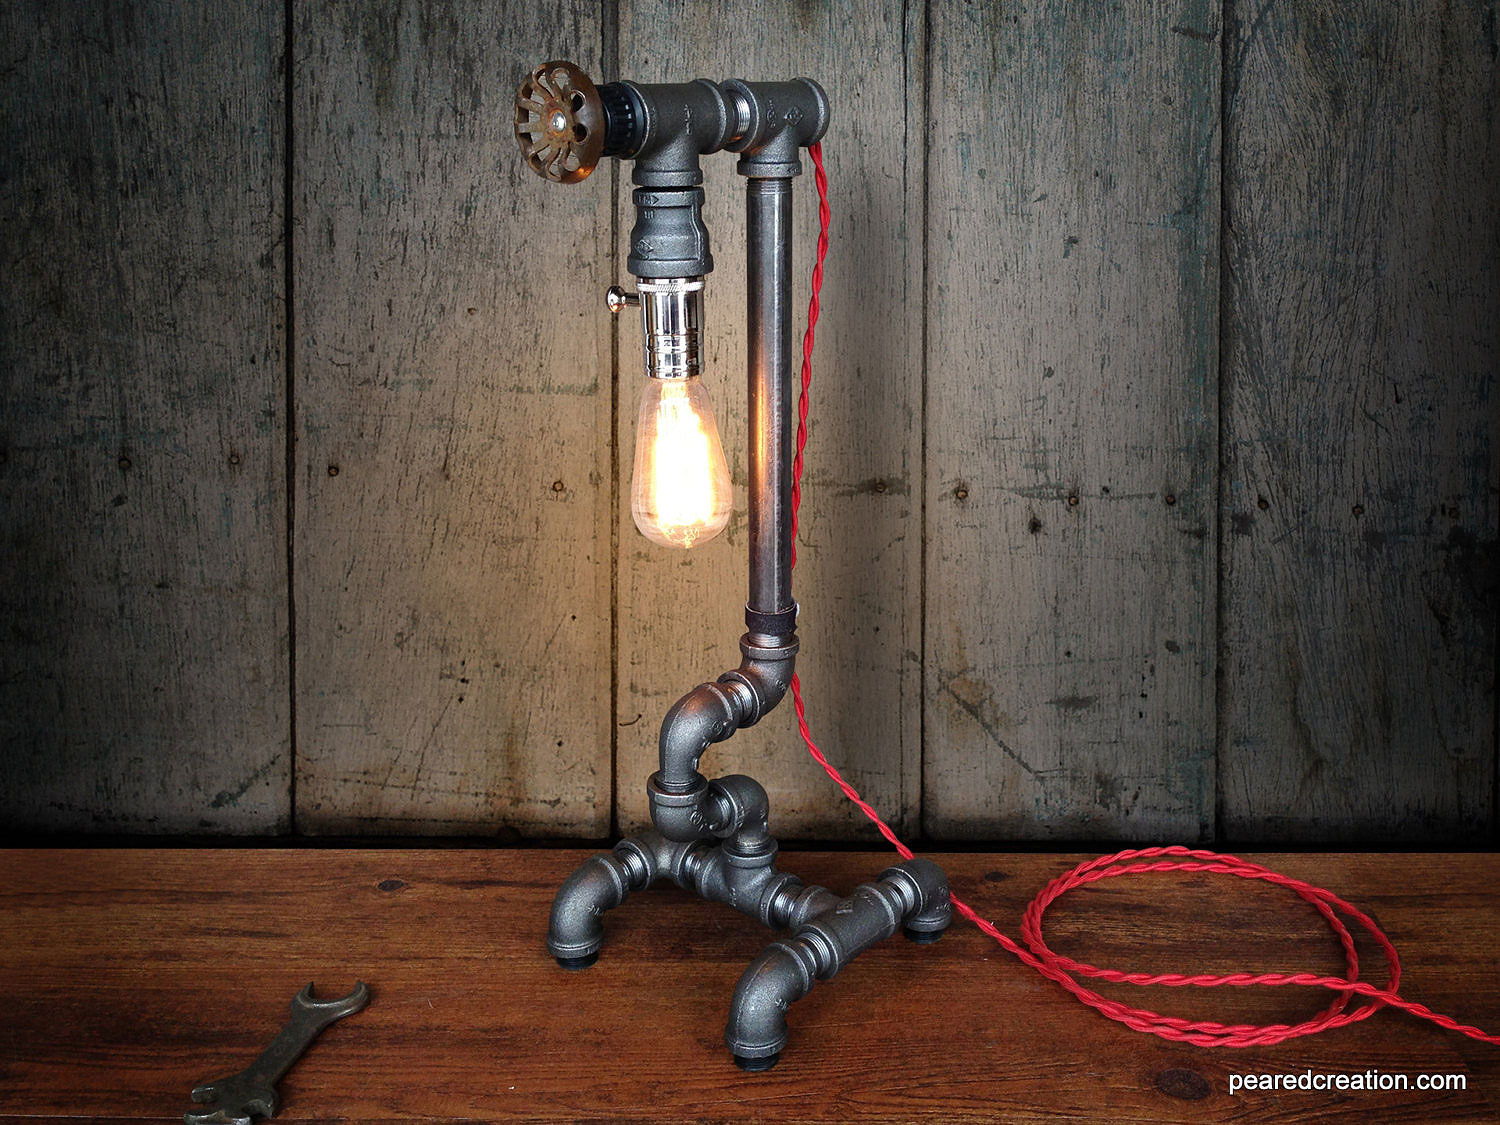 The Industrial Lamp by Pear Creation